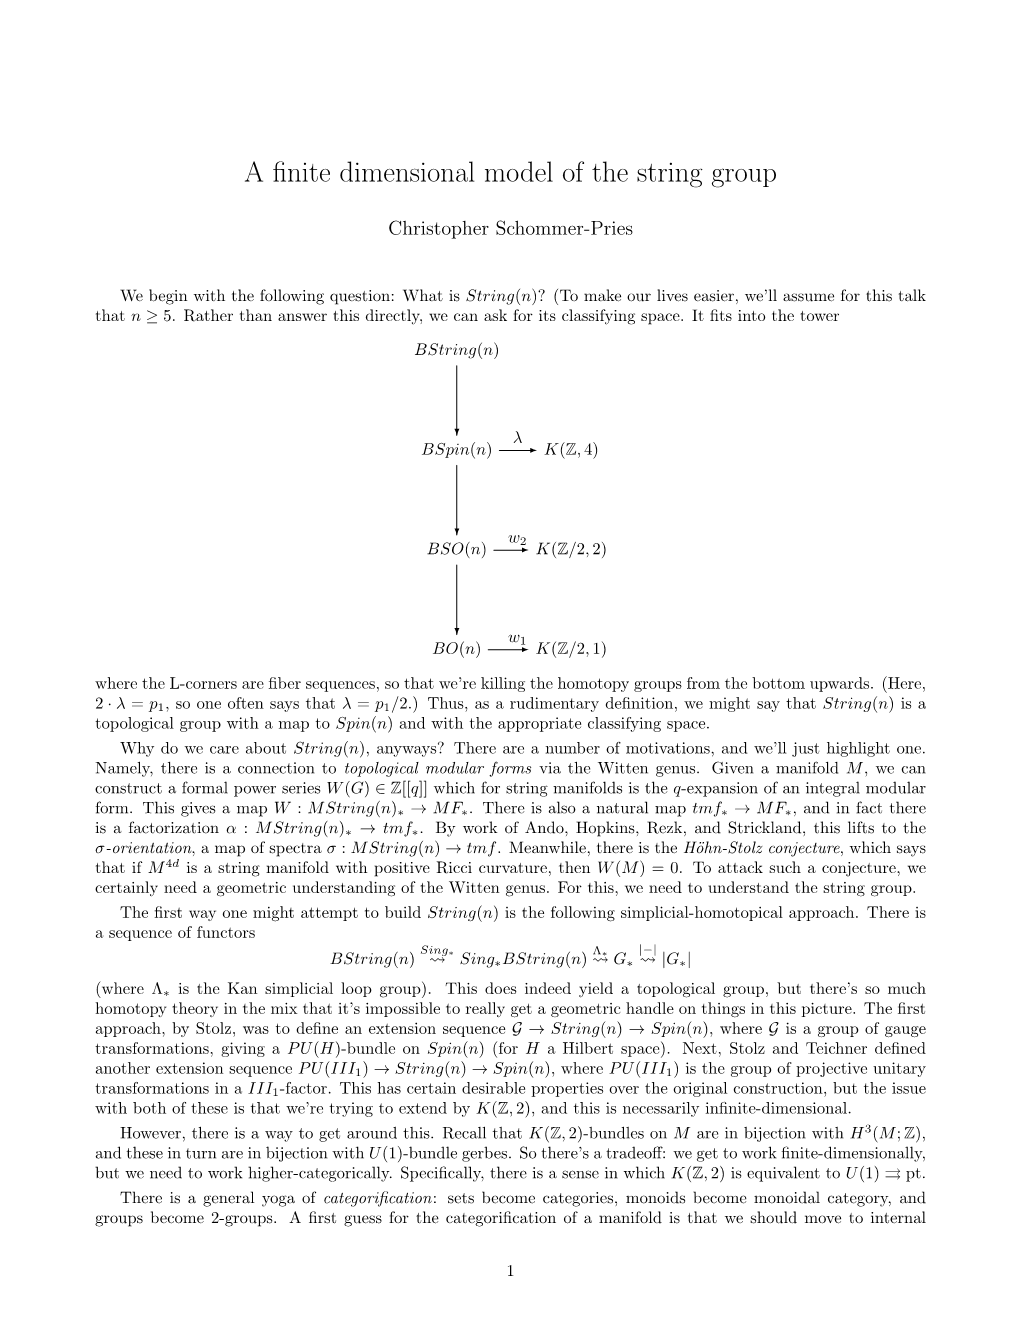 A Finite Dimensional Model of the String Group